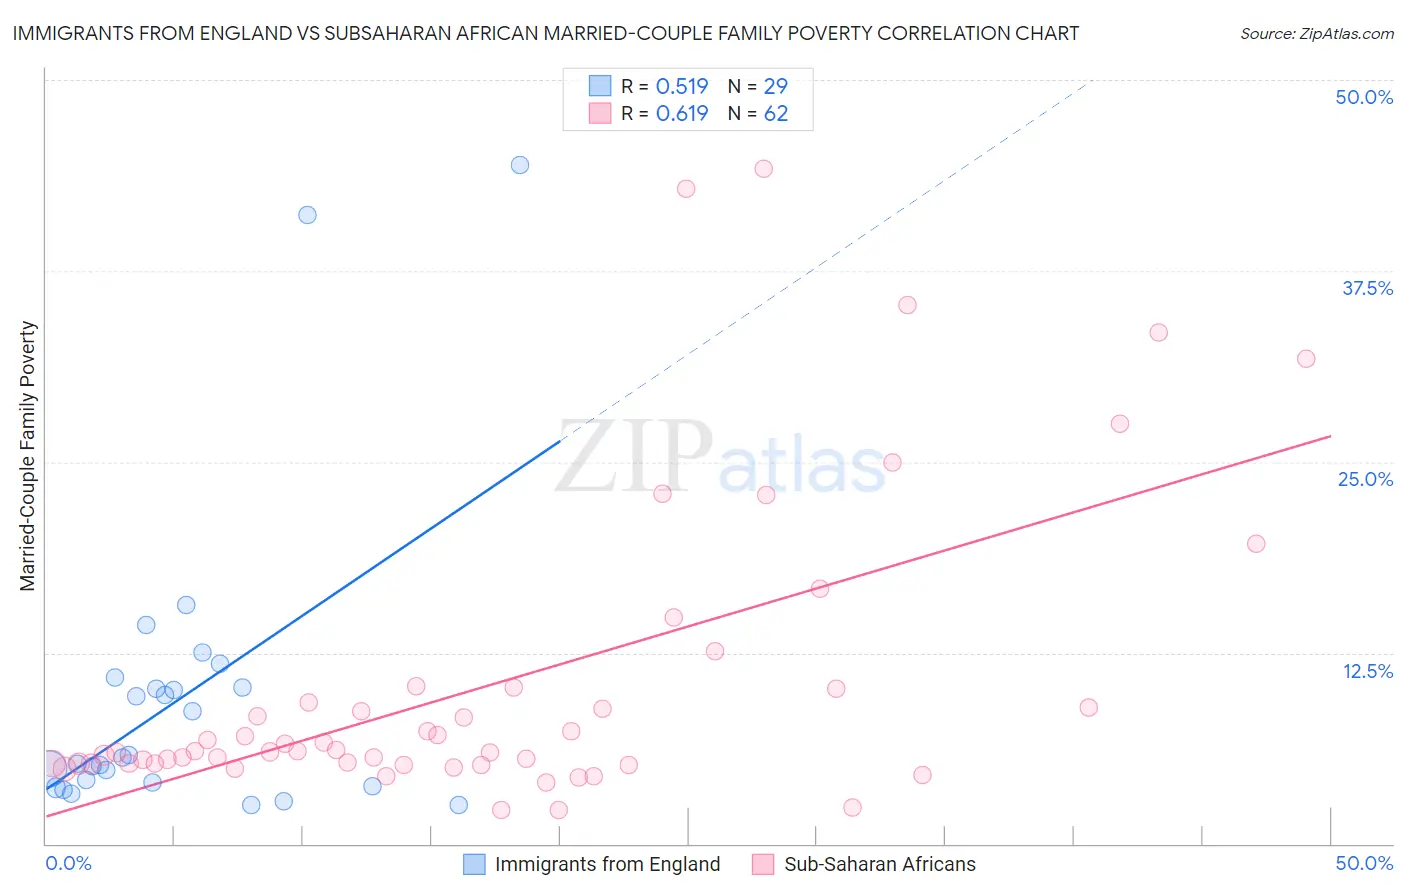 Immigrants from England vs Subsaharan African Married-Couple Family Poverty